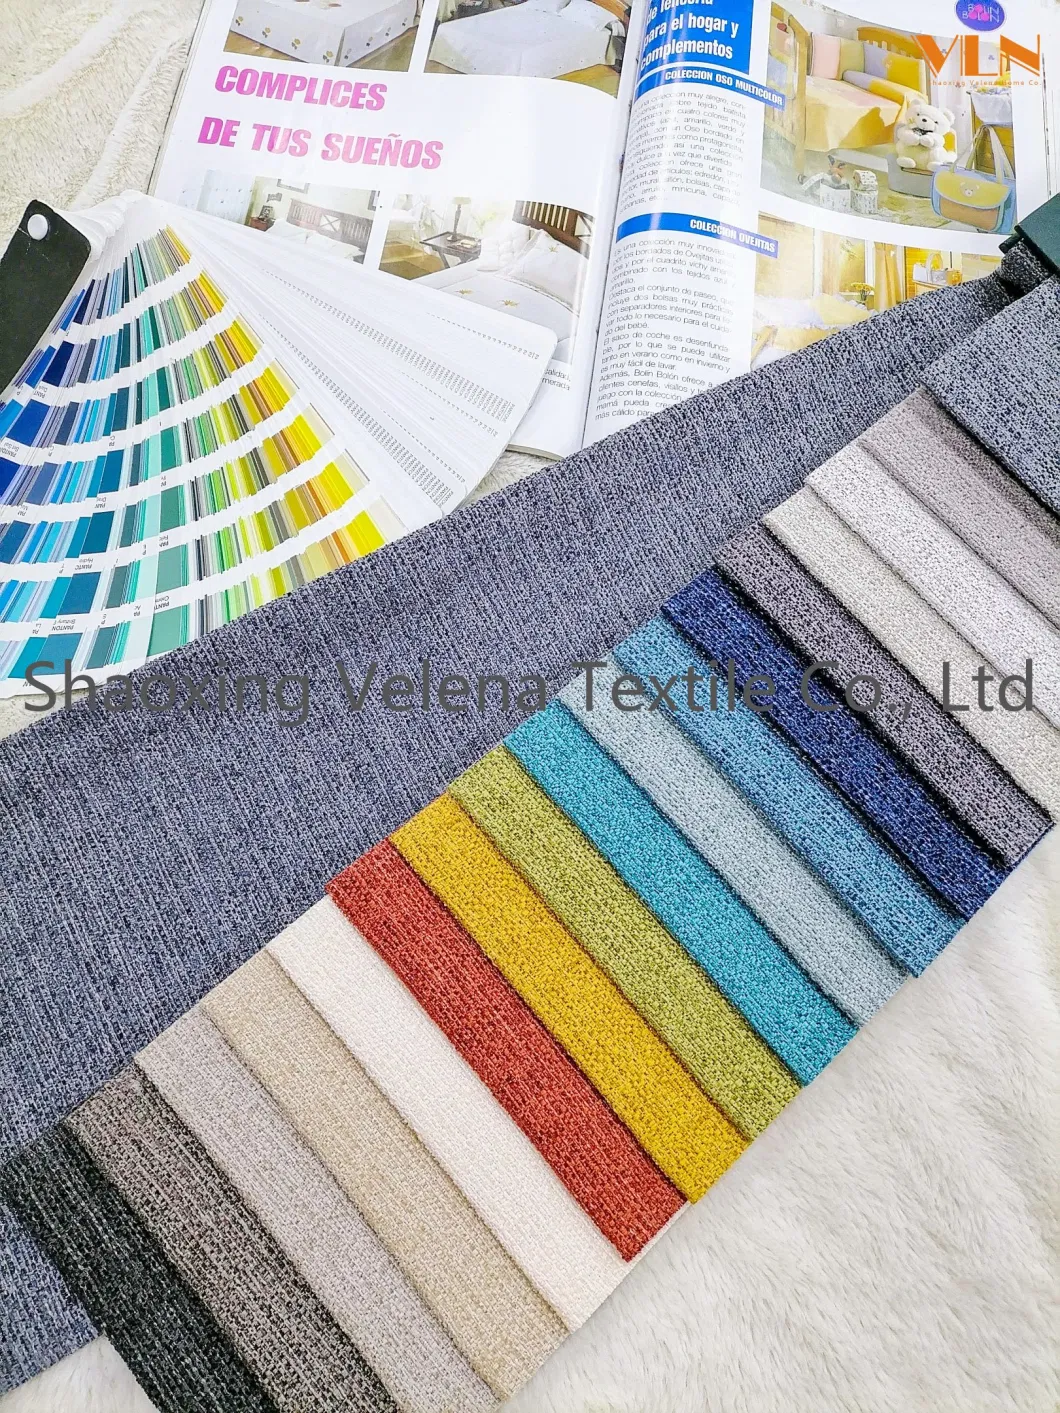 Polyester Linen Look Woven Yarn Dyed Fabric Upholstery Hotel Sofa Curtain Furniture Home Textile Fabric